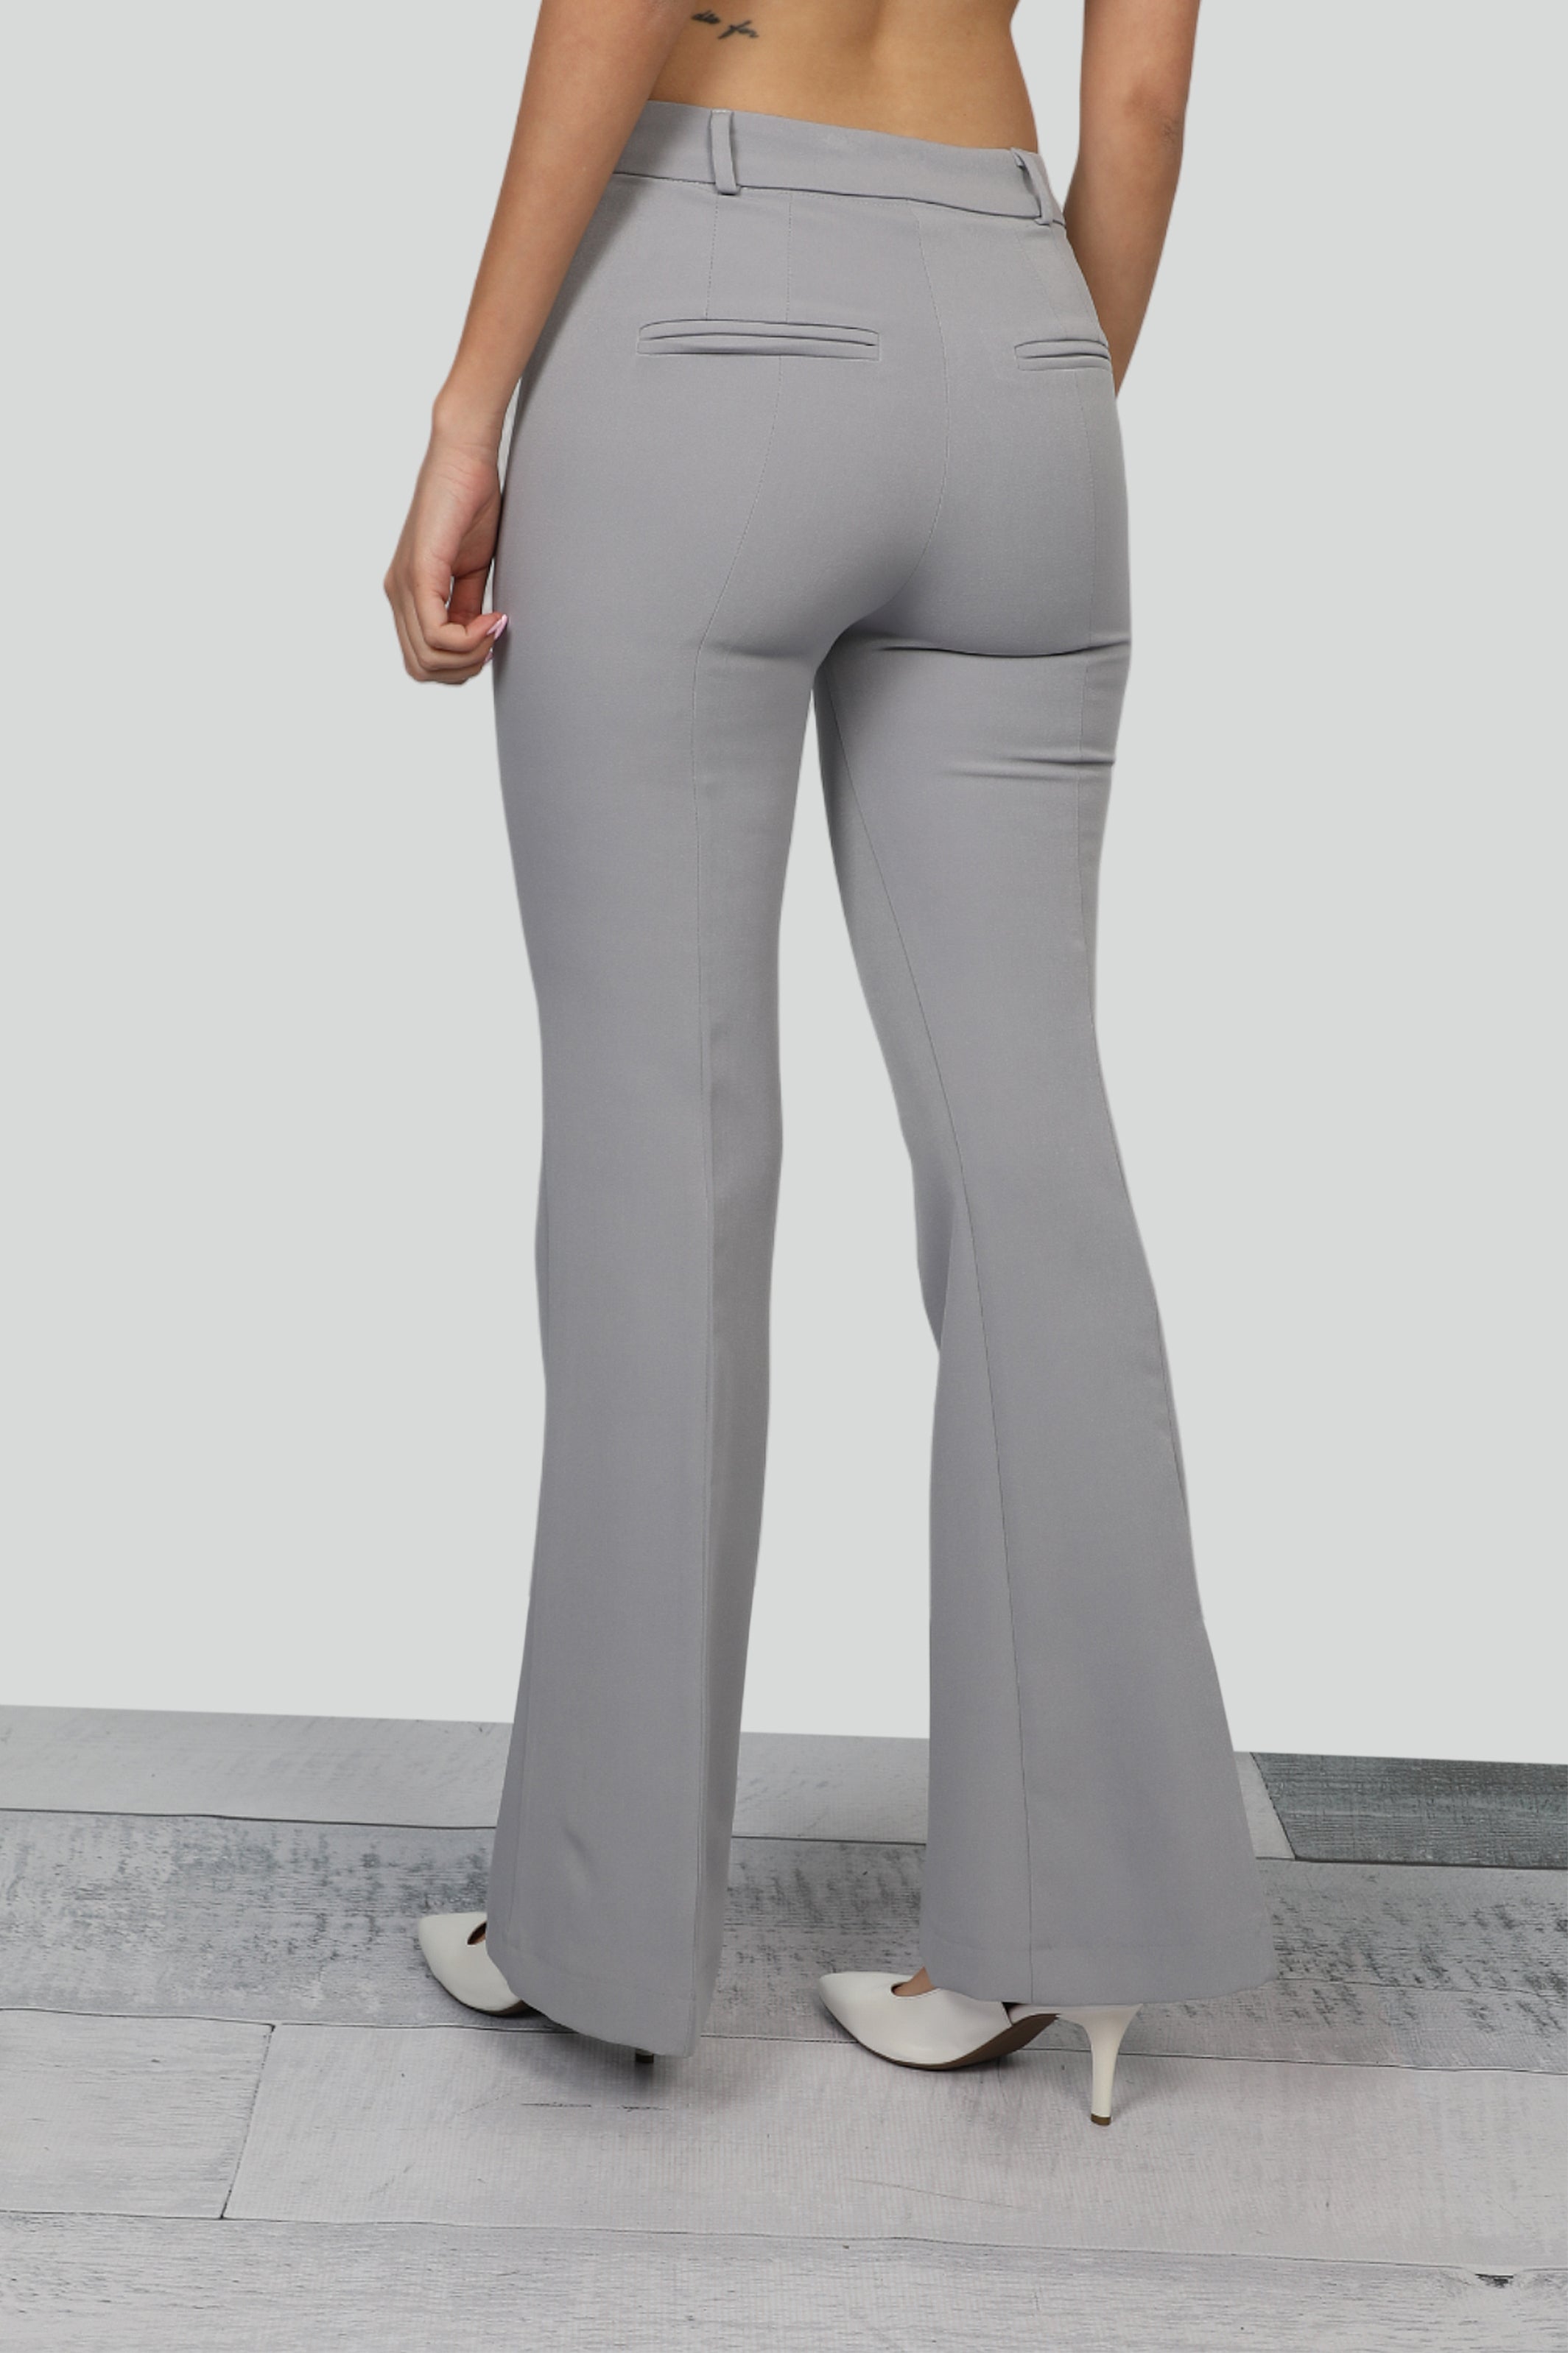 Classy Flare Grey Pants With Zipper To Close